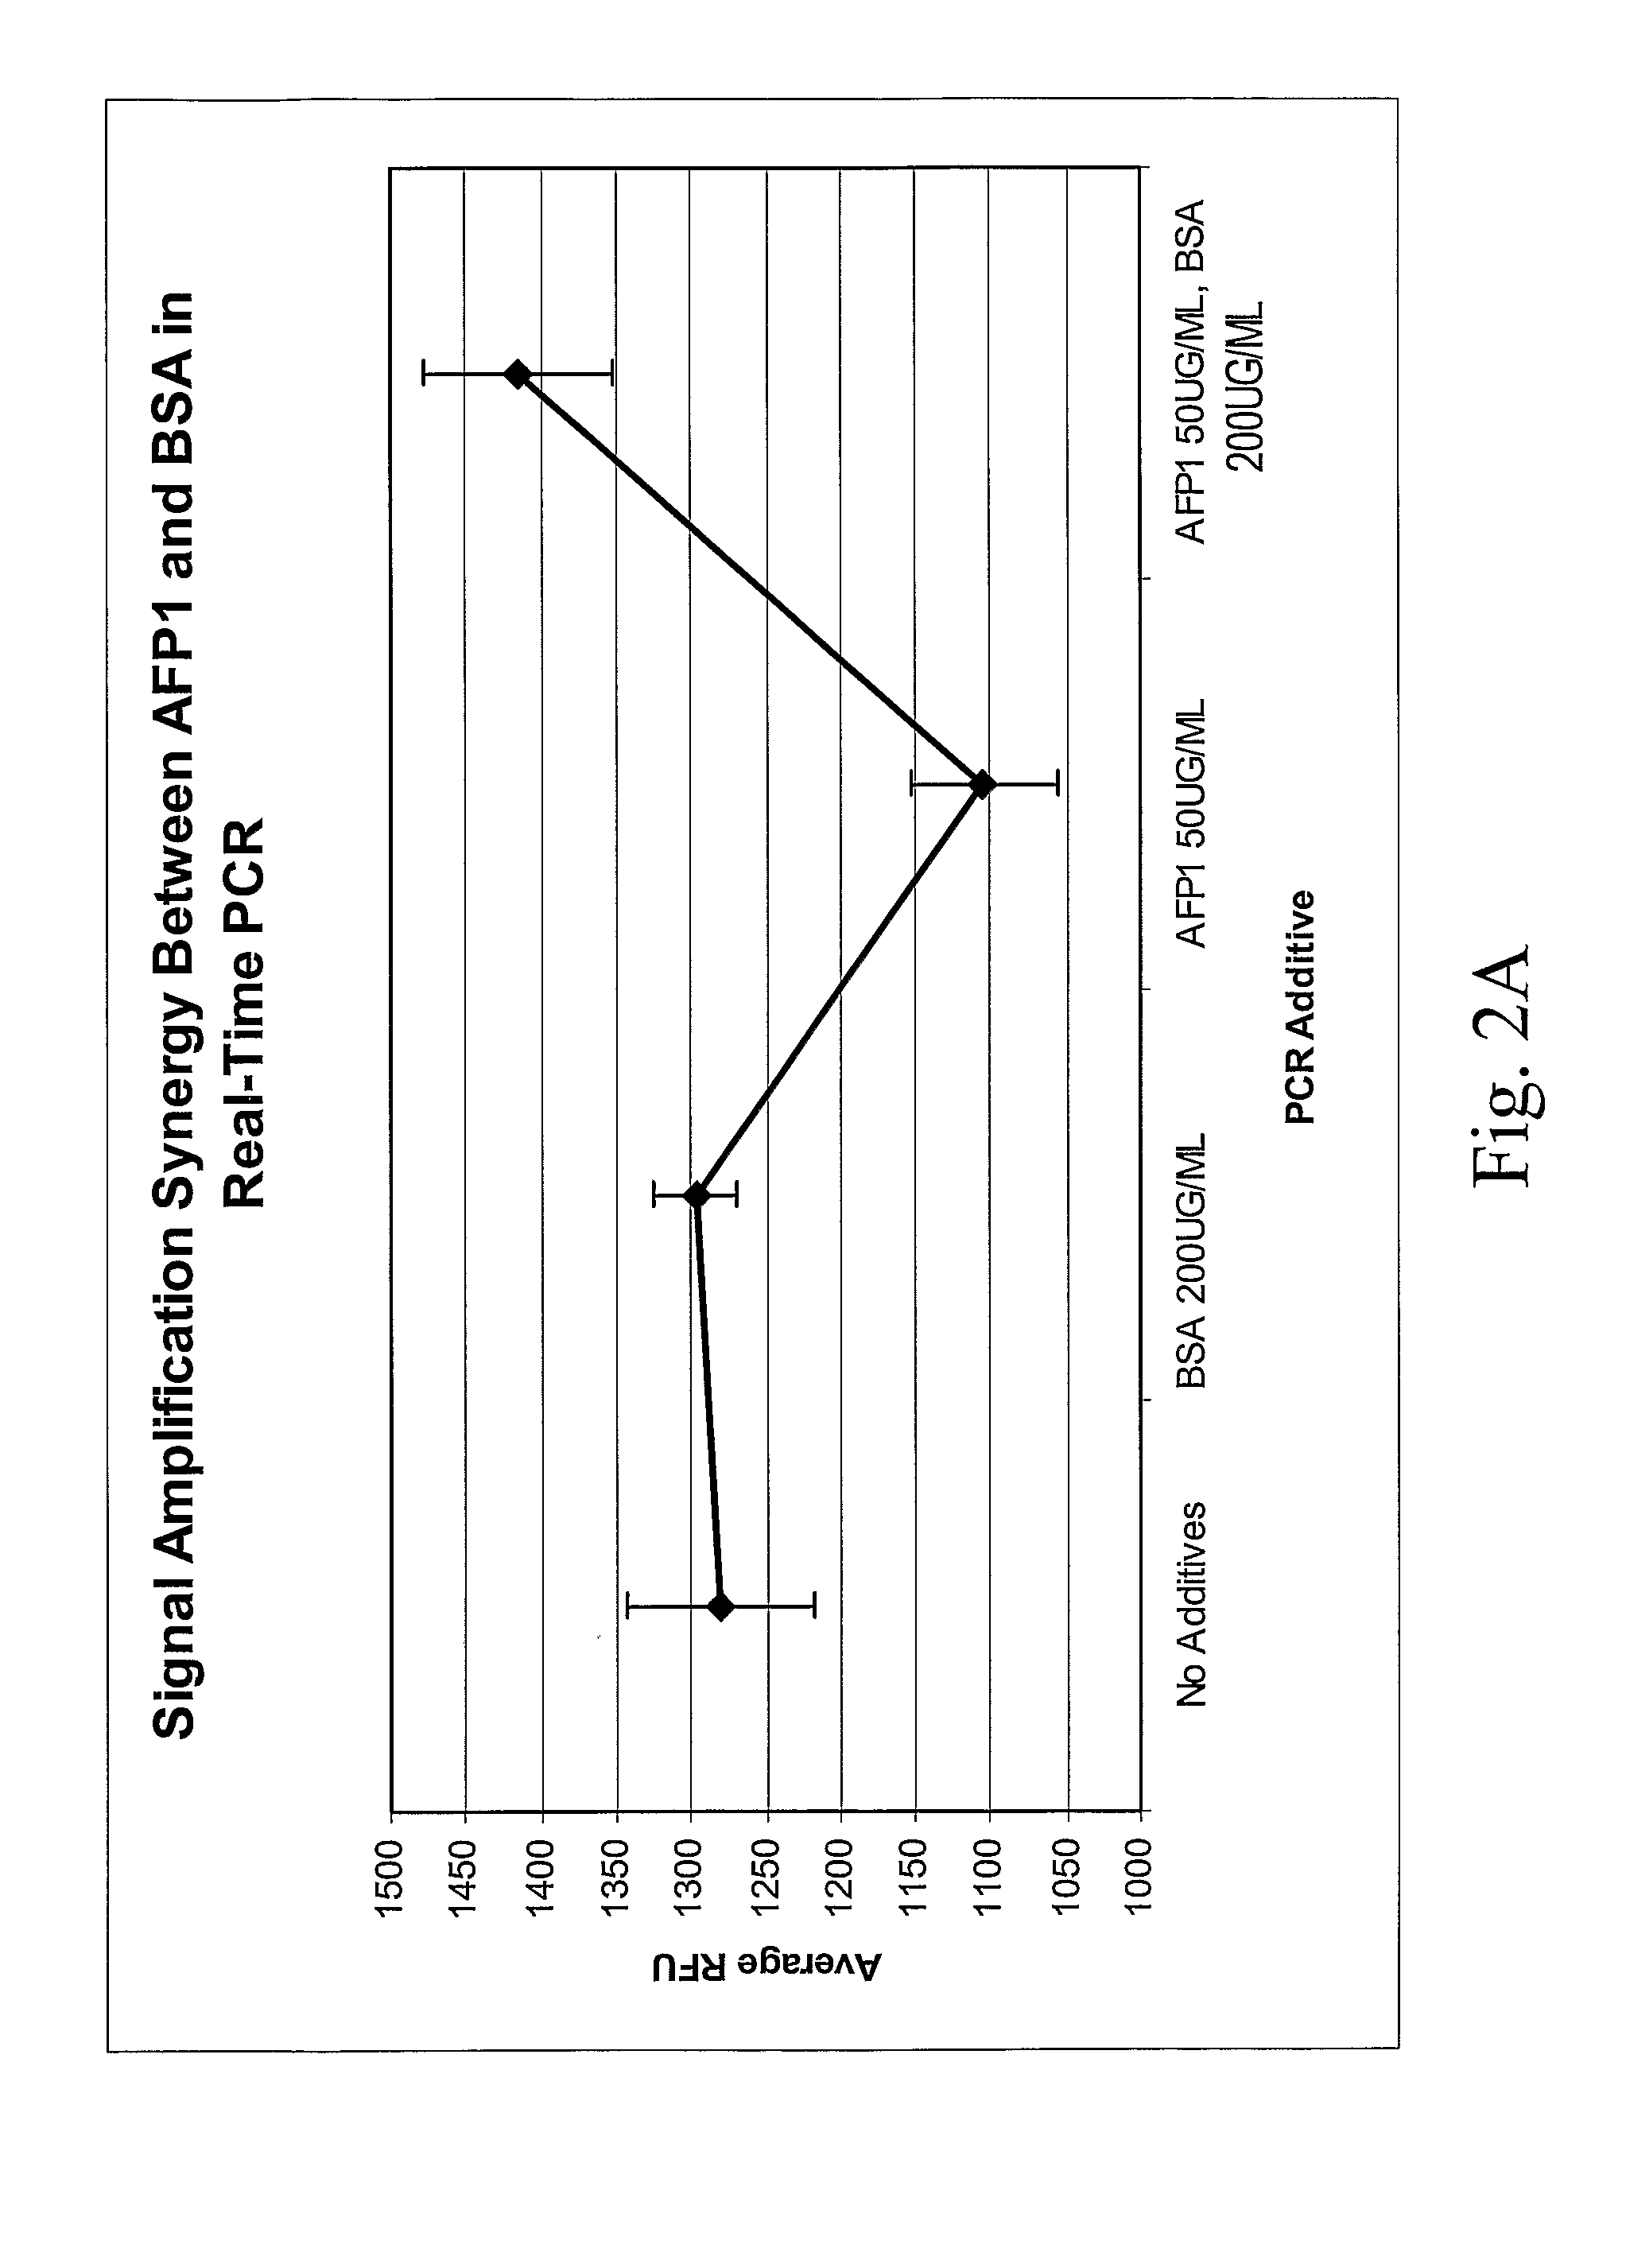 Anti-freeze protein enhanced nucleic acid amplification